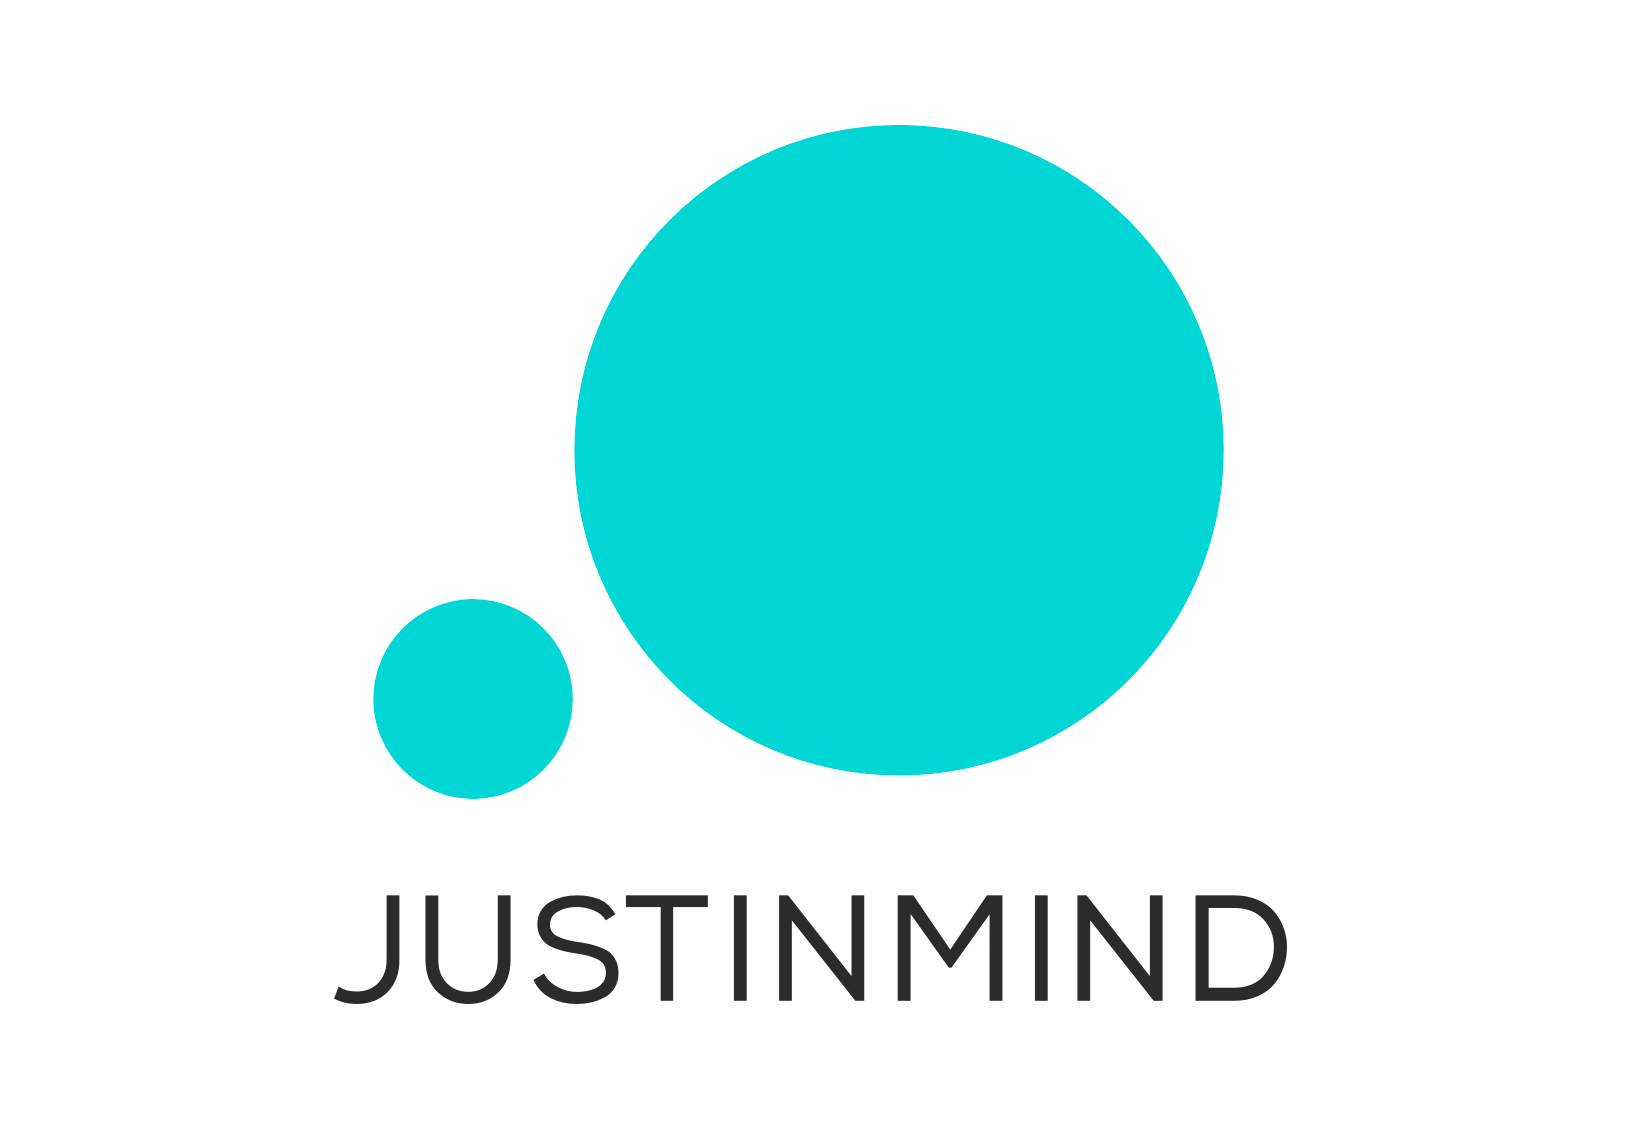 justinmind transparency text